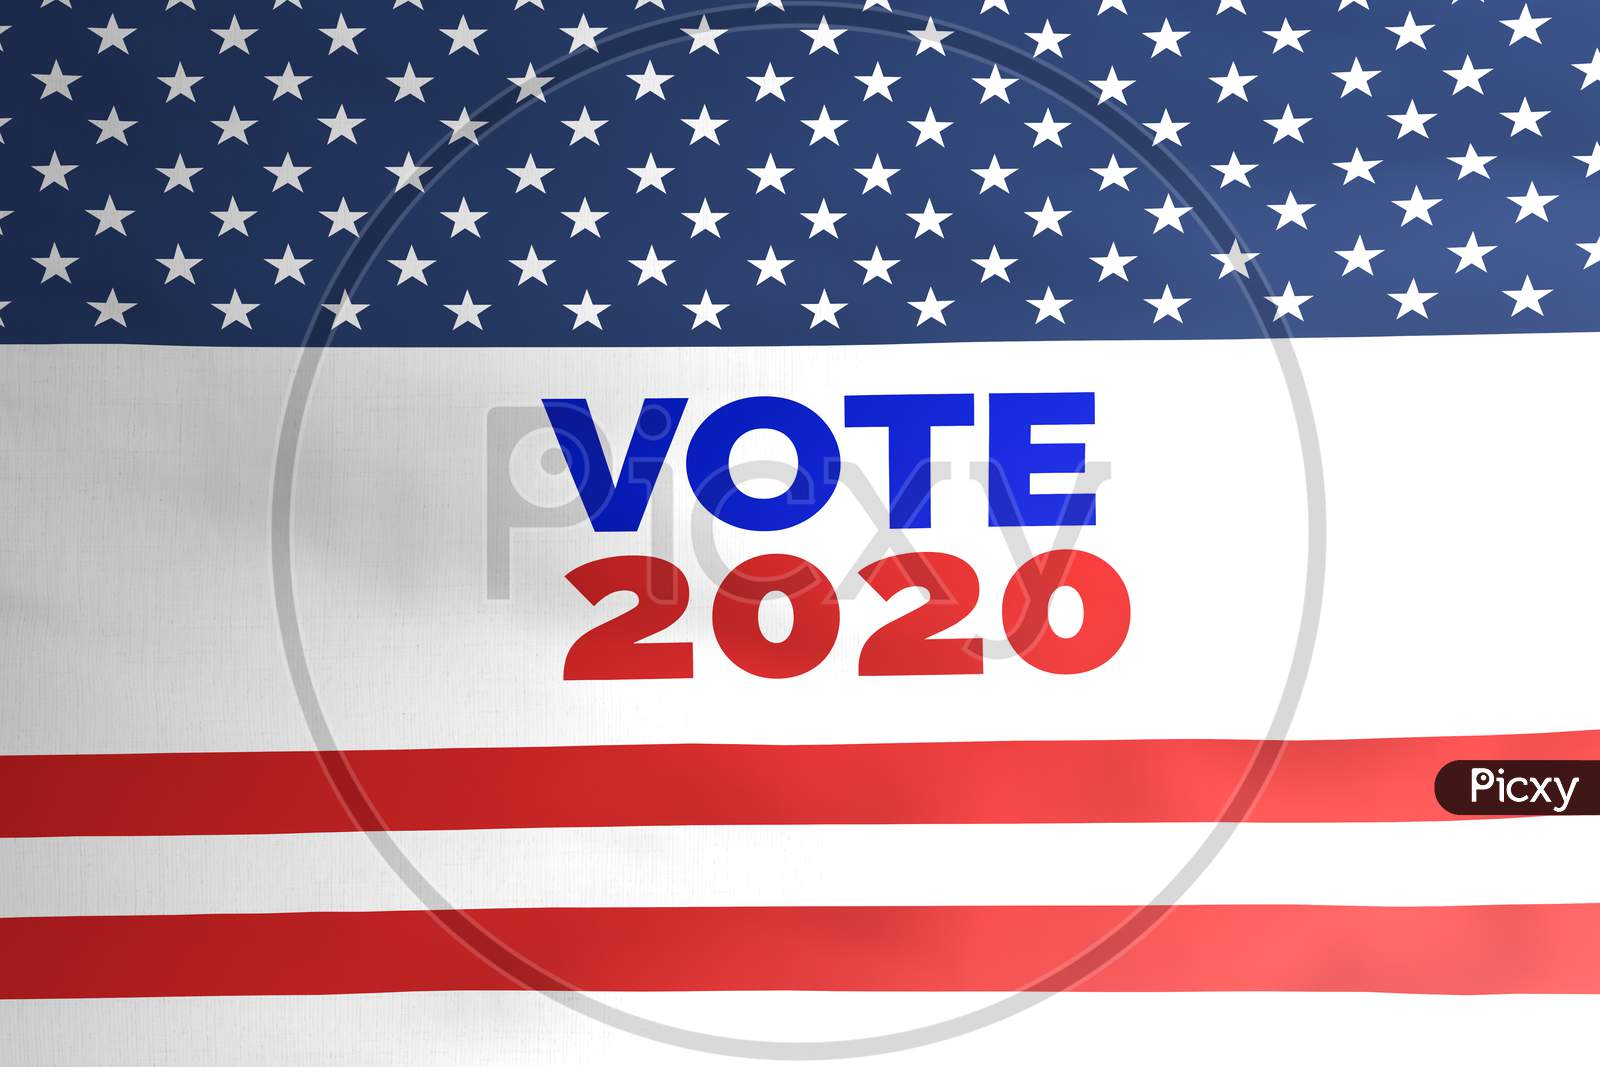 Vote 2020 On American Flag Illustration, Usa Presidential Election 2020 Concept During Covid-19 Pandemic.